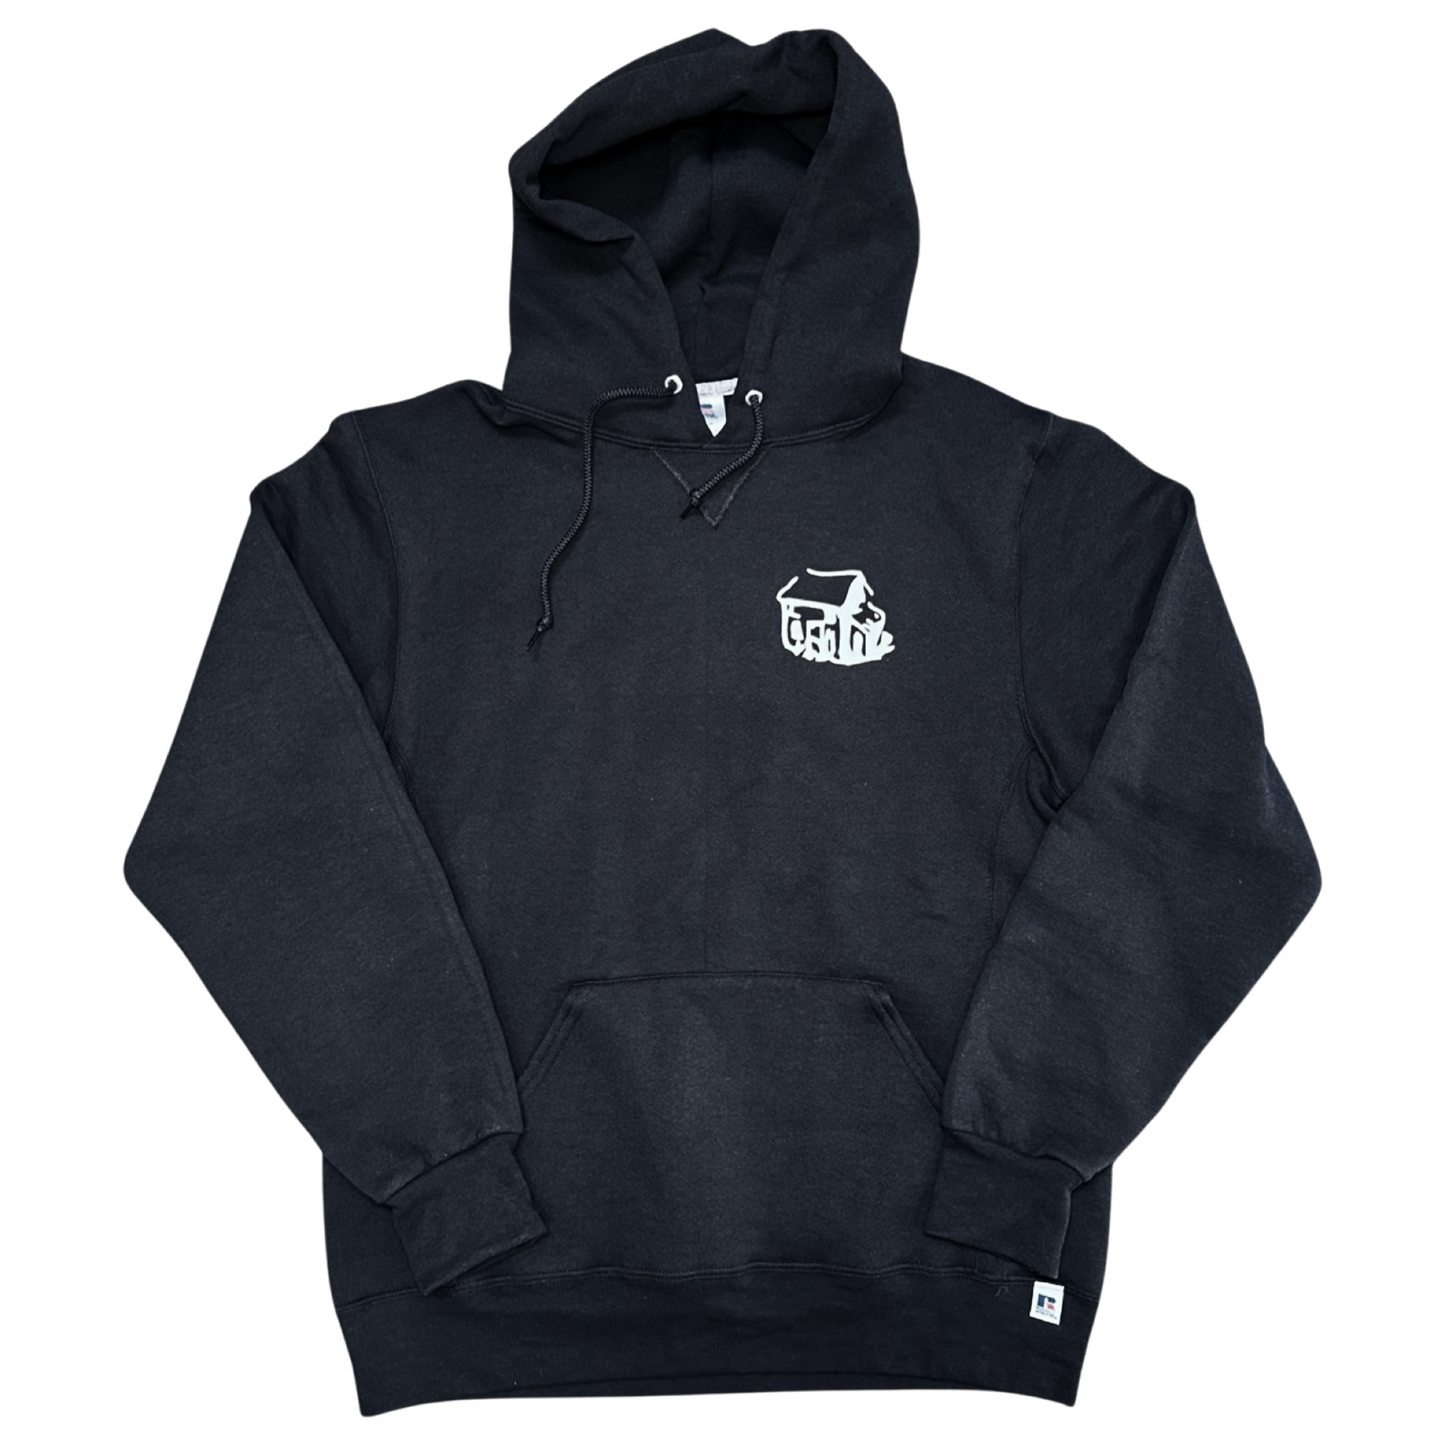 Marc Gonzales Krooked Shmoo Skate Shop Day x The Shack Hoodie